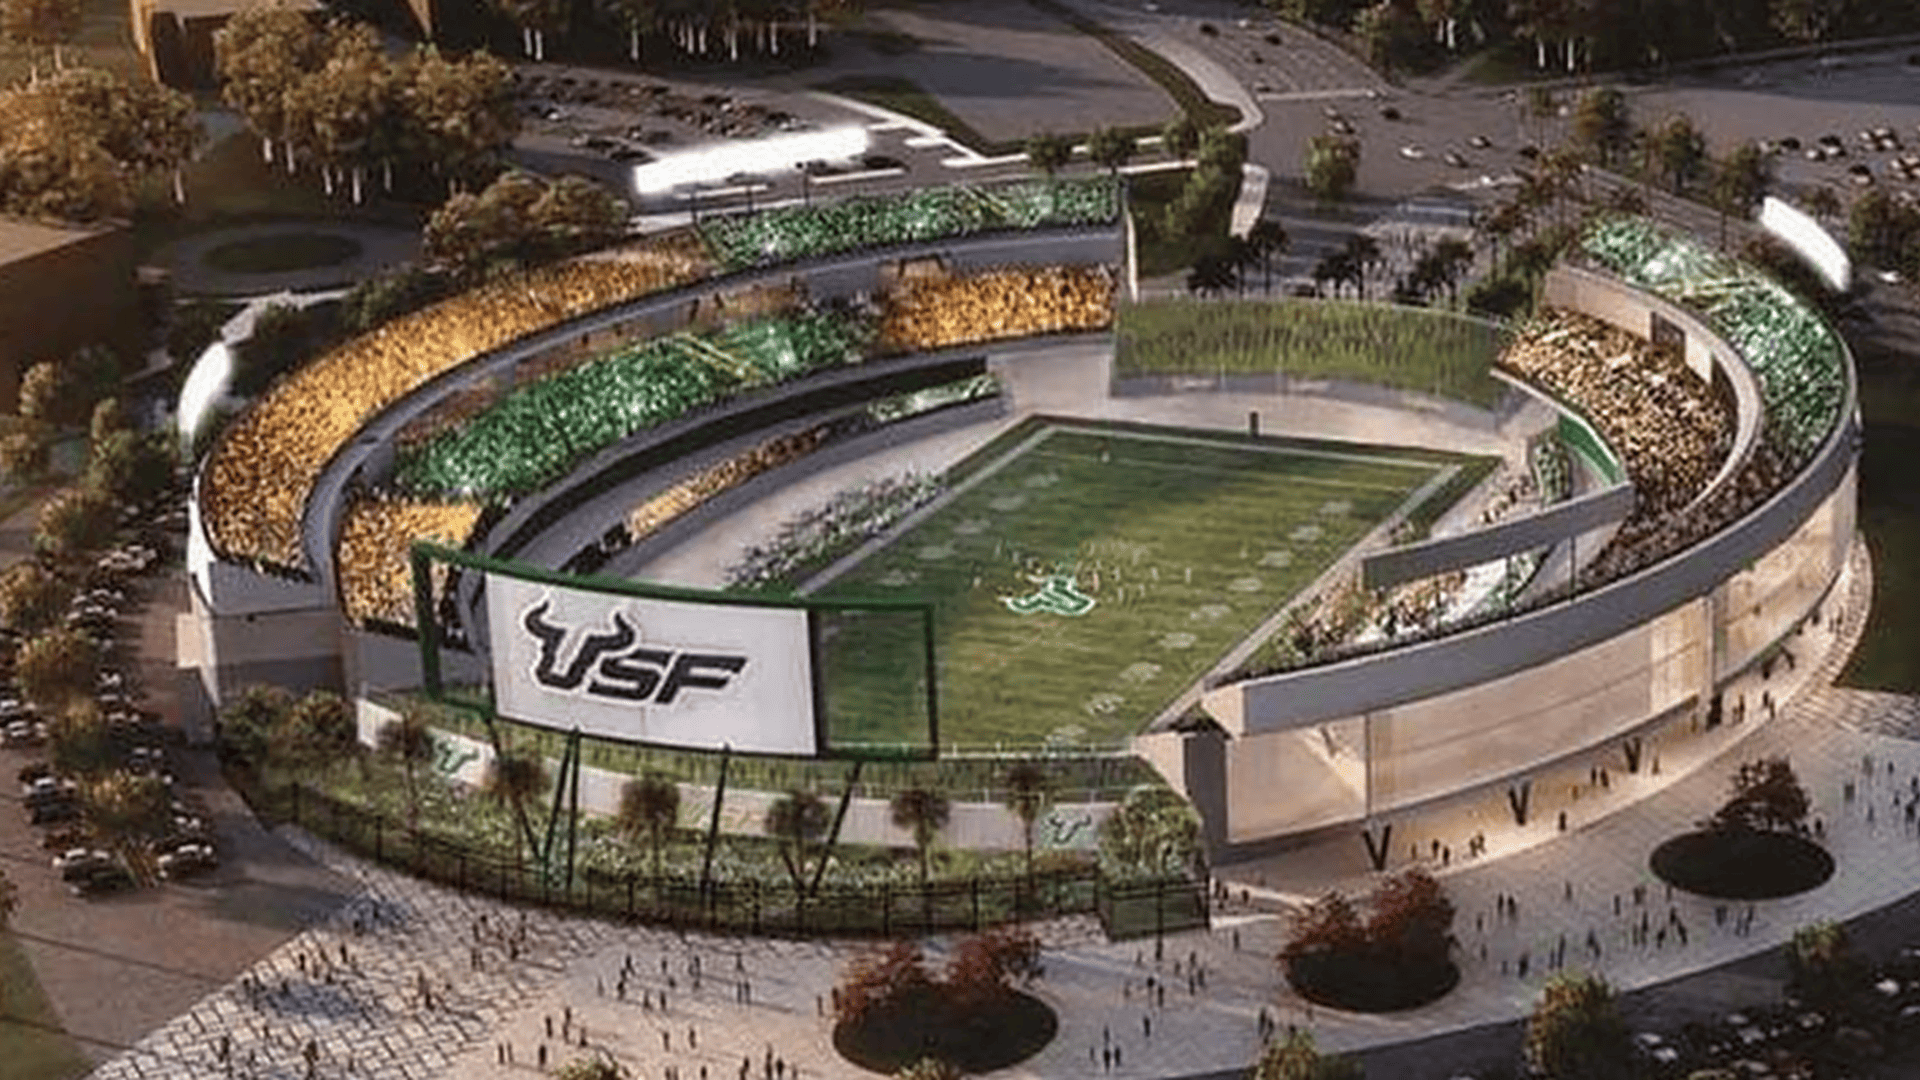 USF approves funding for oncampus football stadium That's So Tampa